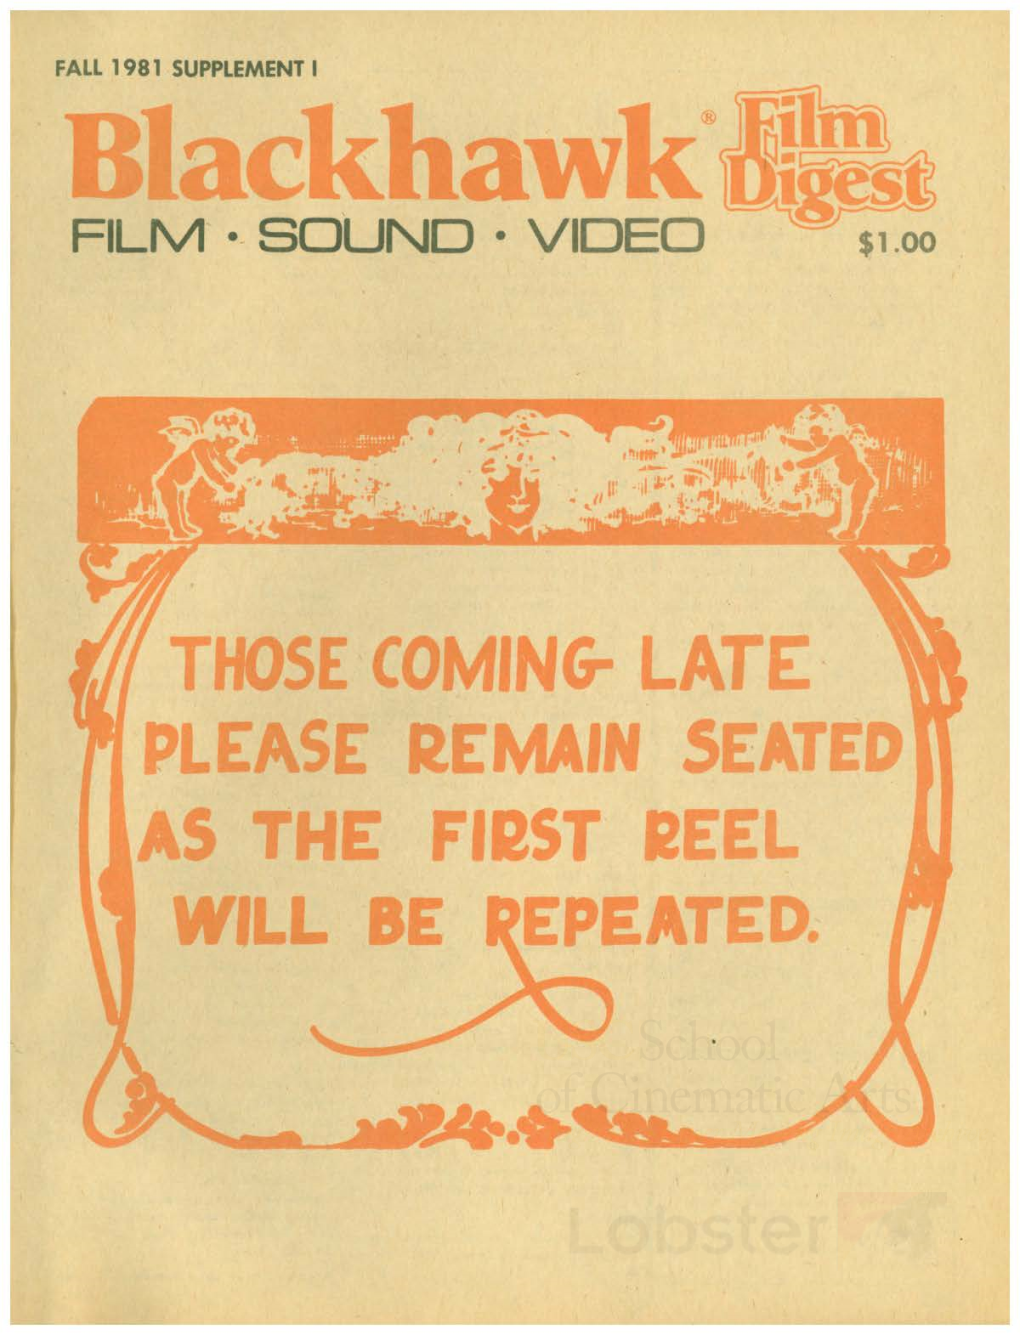 Those Coming- Late Please Remain Seated As the First Reel Will Be Epeated